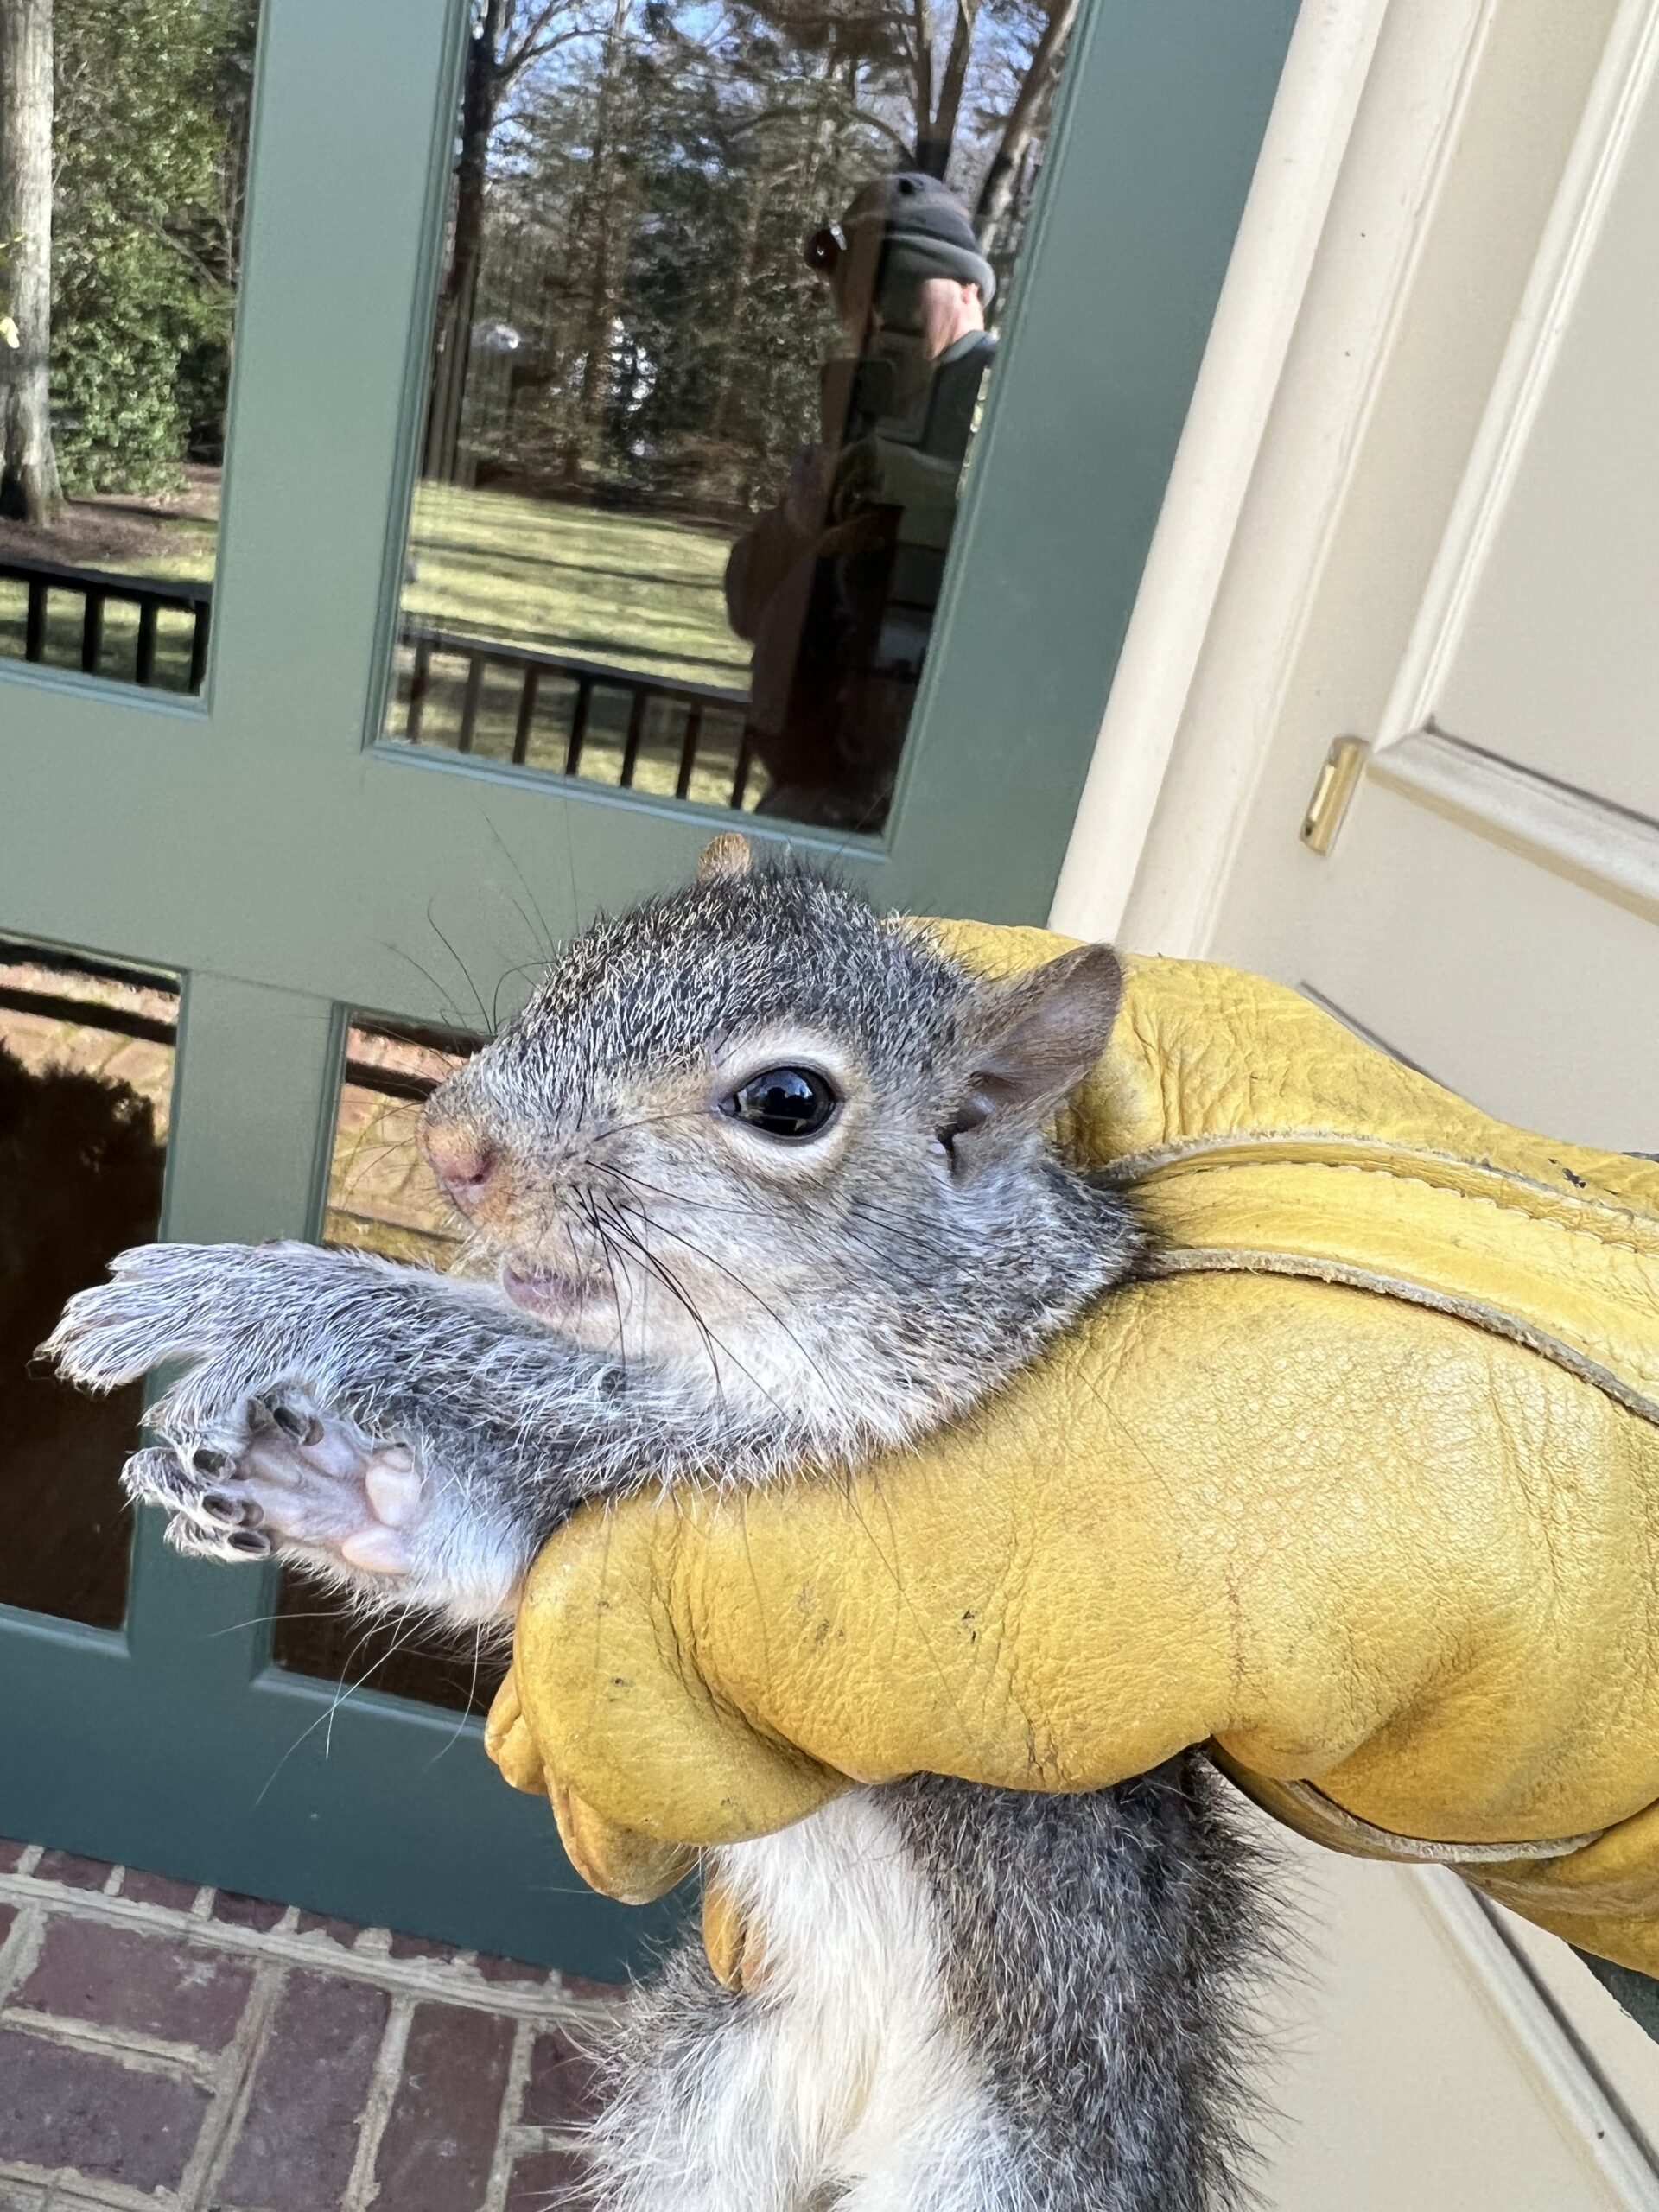 https://virginia-wildlife-removal.com/wp-content/uploads/2022/03/IMG_29051-scaled.jpg